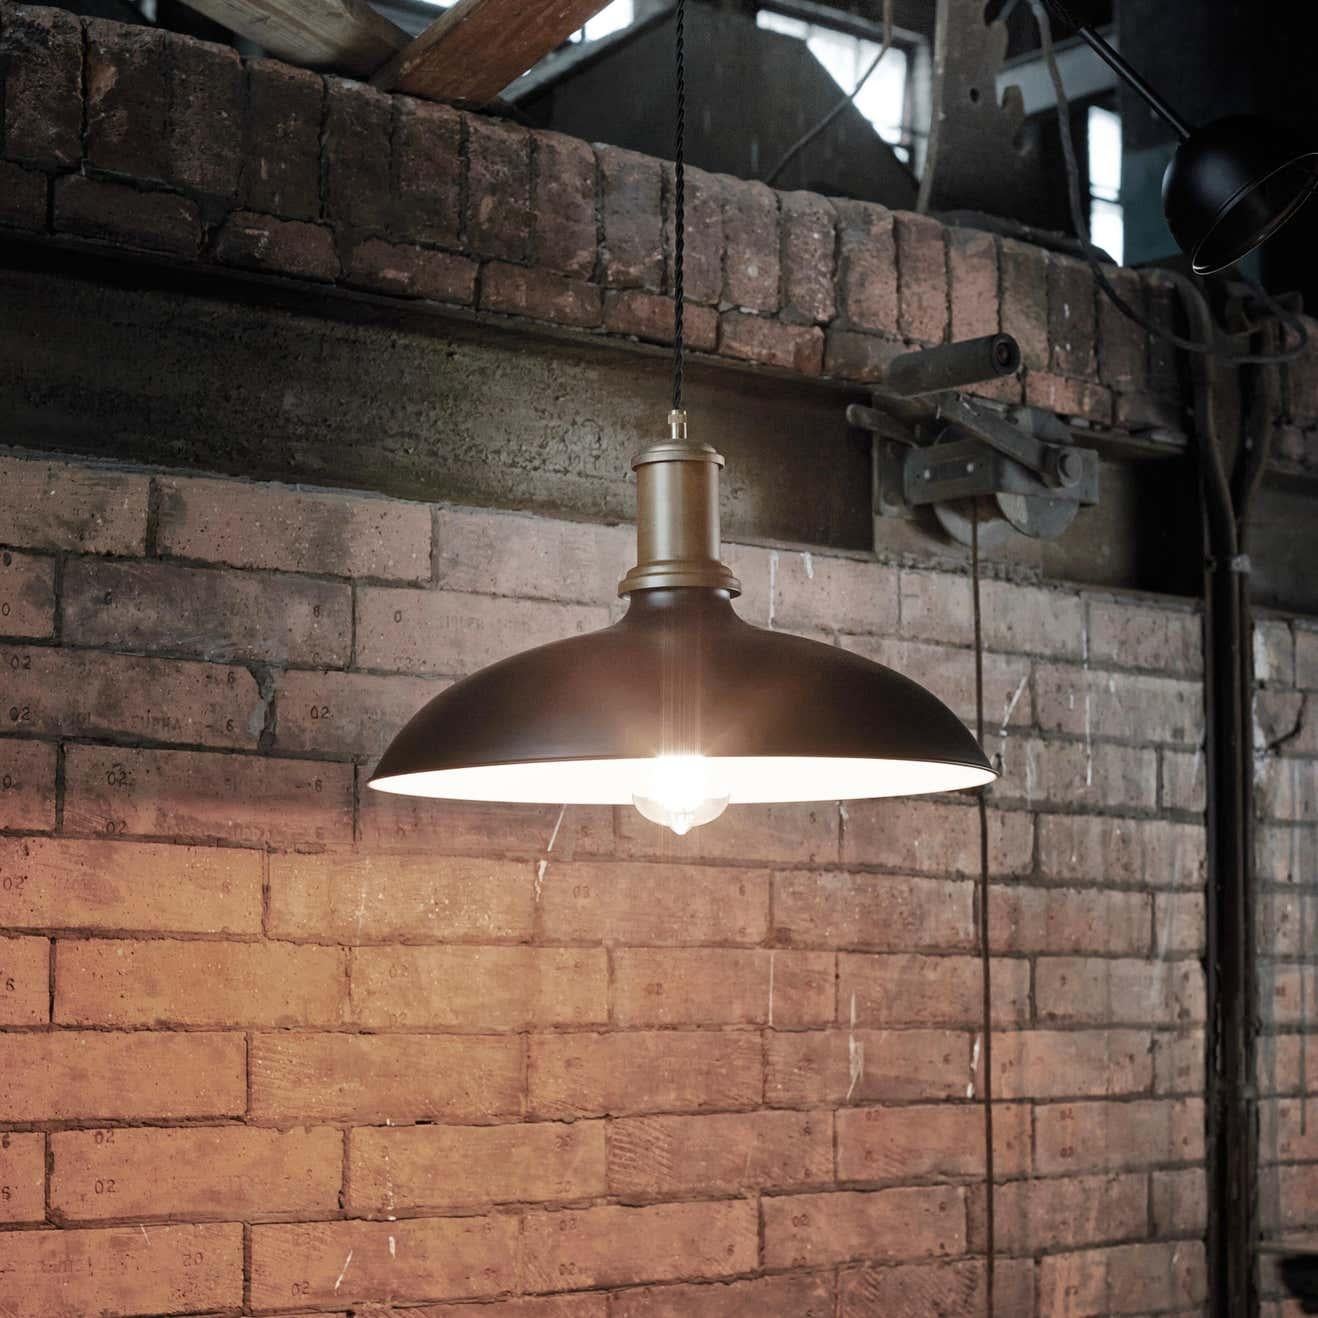 Contemporary Sabina Grubbeson Large Kavaljer Iron Oxide Ceiling Lamp by Konsthantverk For Sale